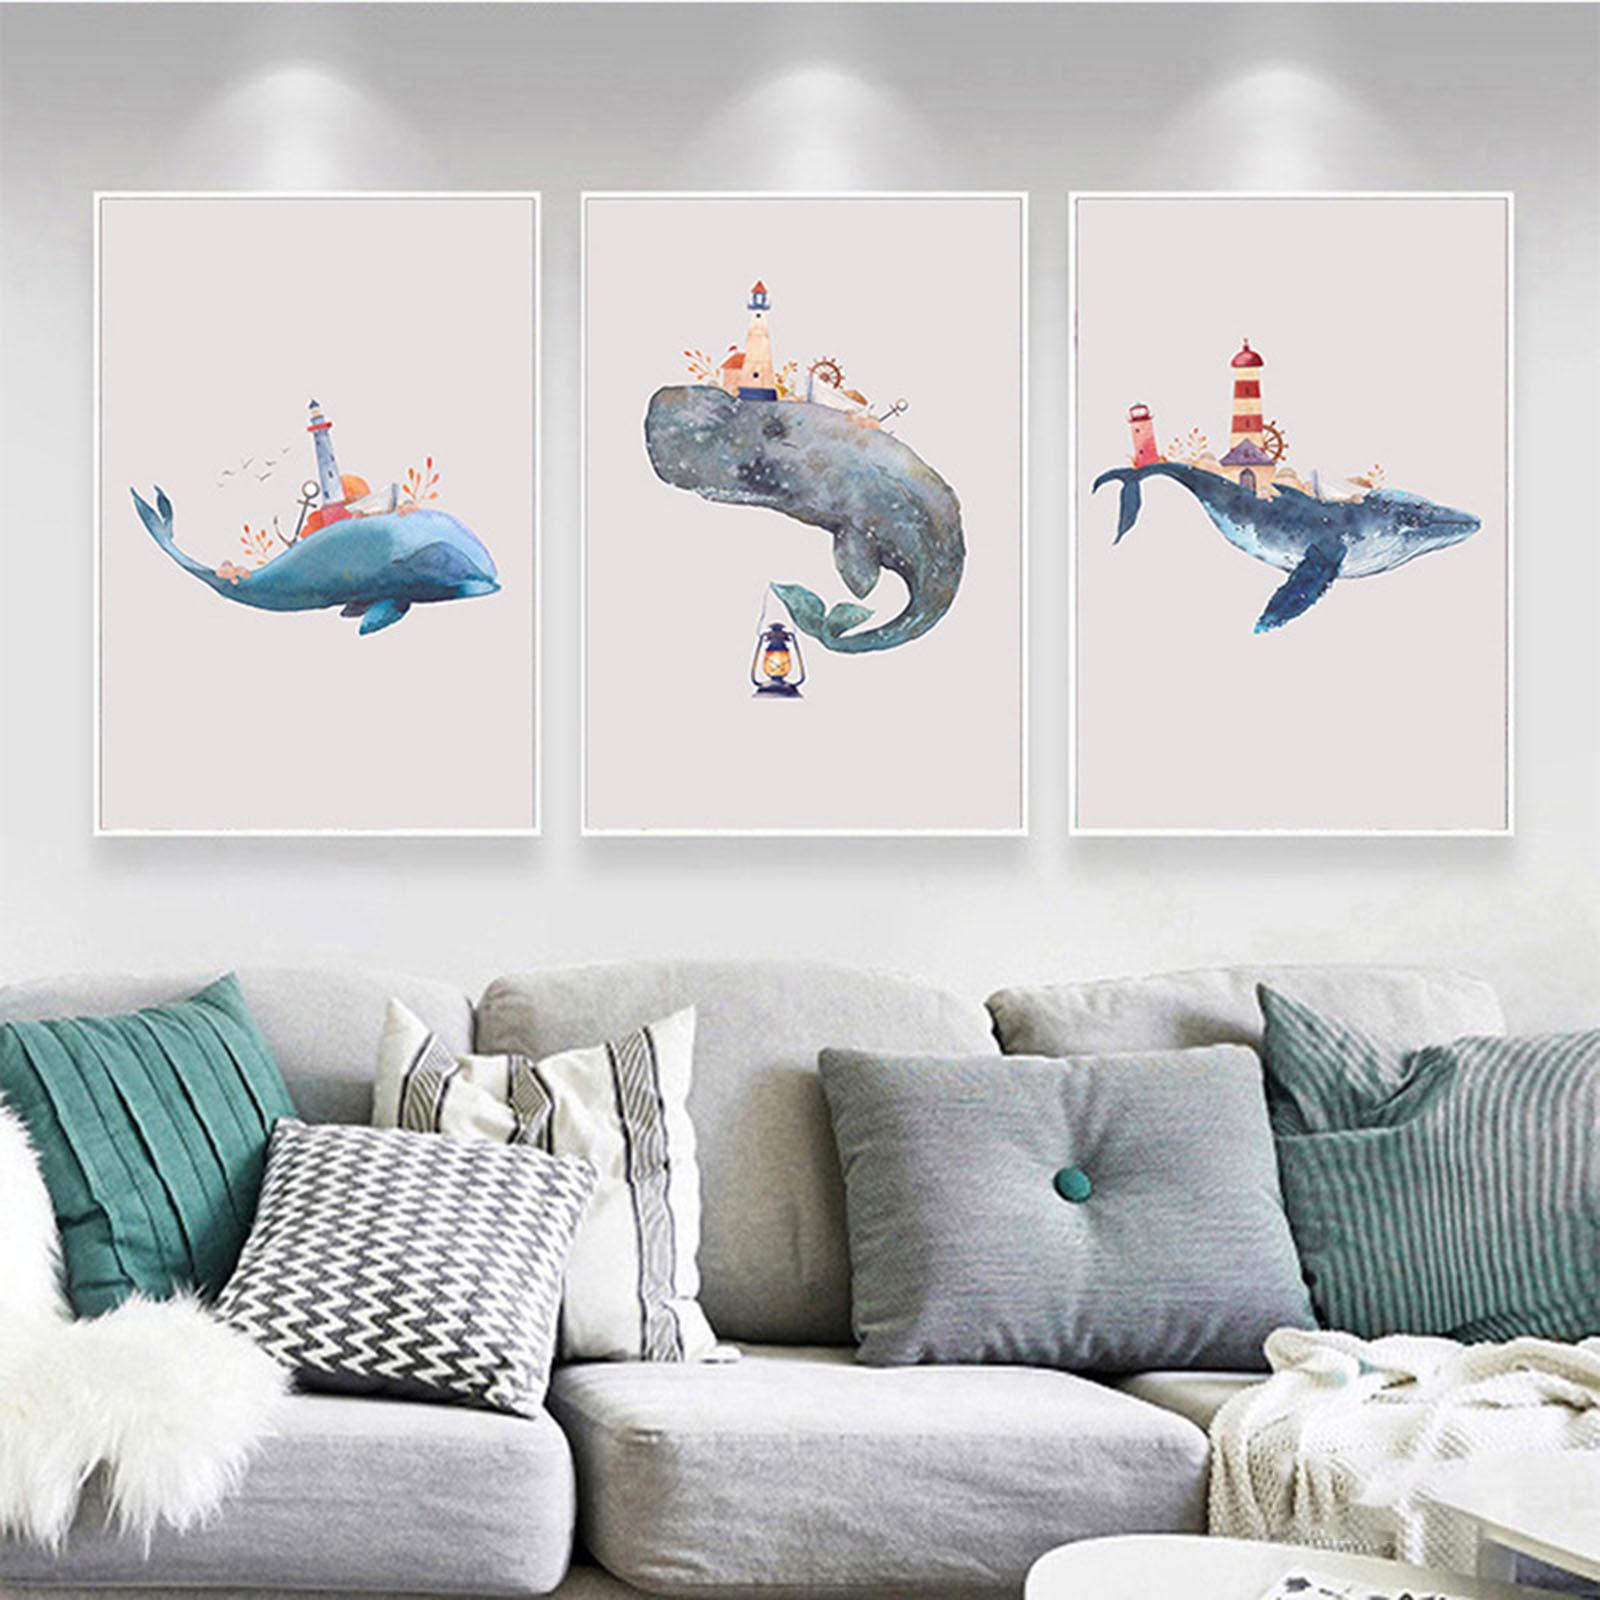 Wall Art Pictures Prints Posters for Decorations Living Room Wall Decor D